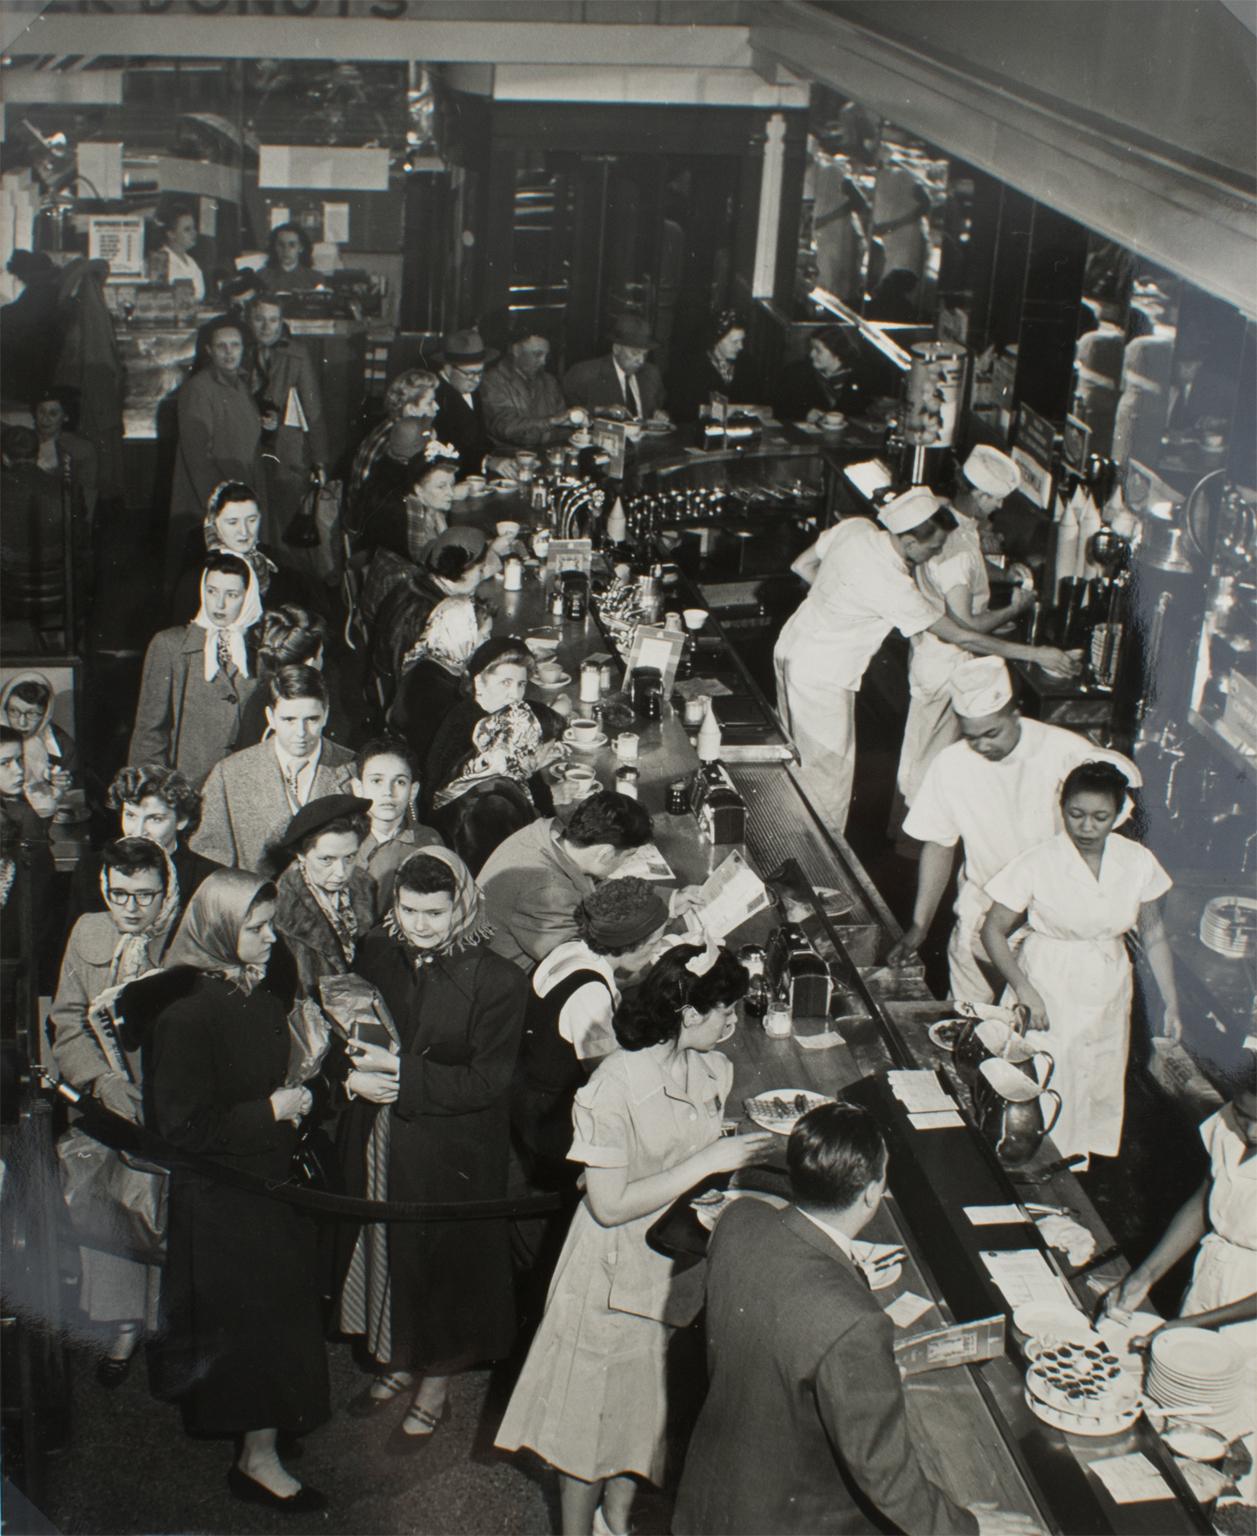 A busy Diner in New York, 1950 Silver Gelatin Black and White Photography